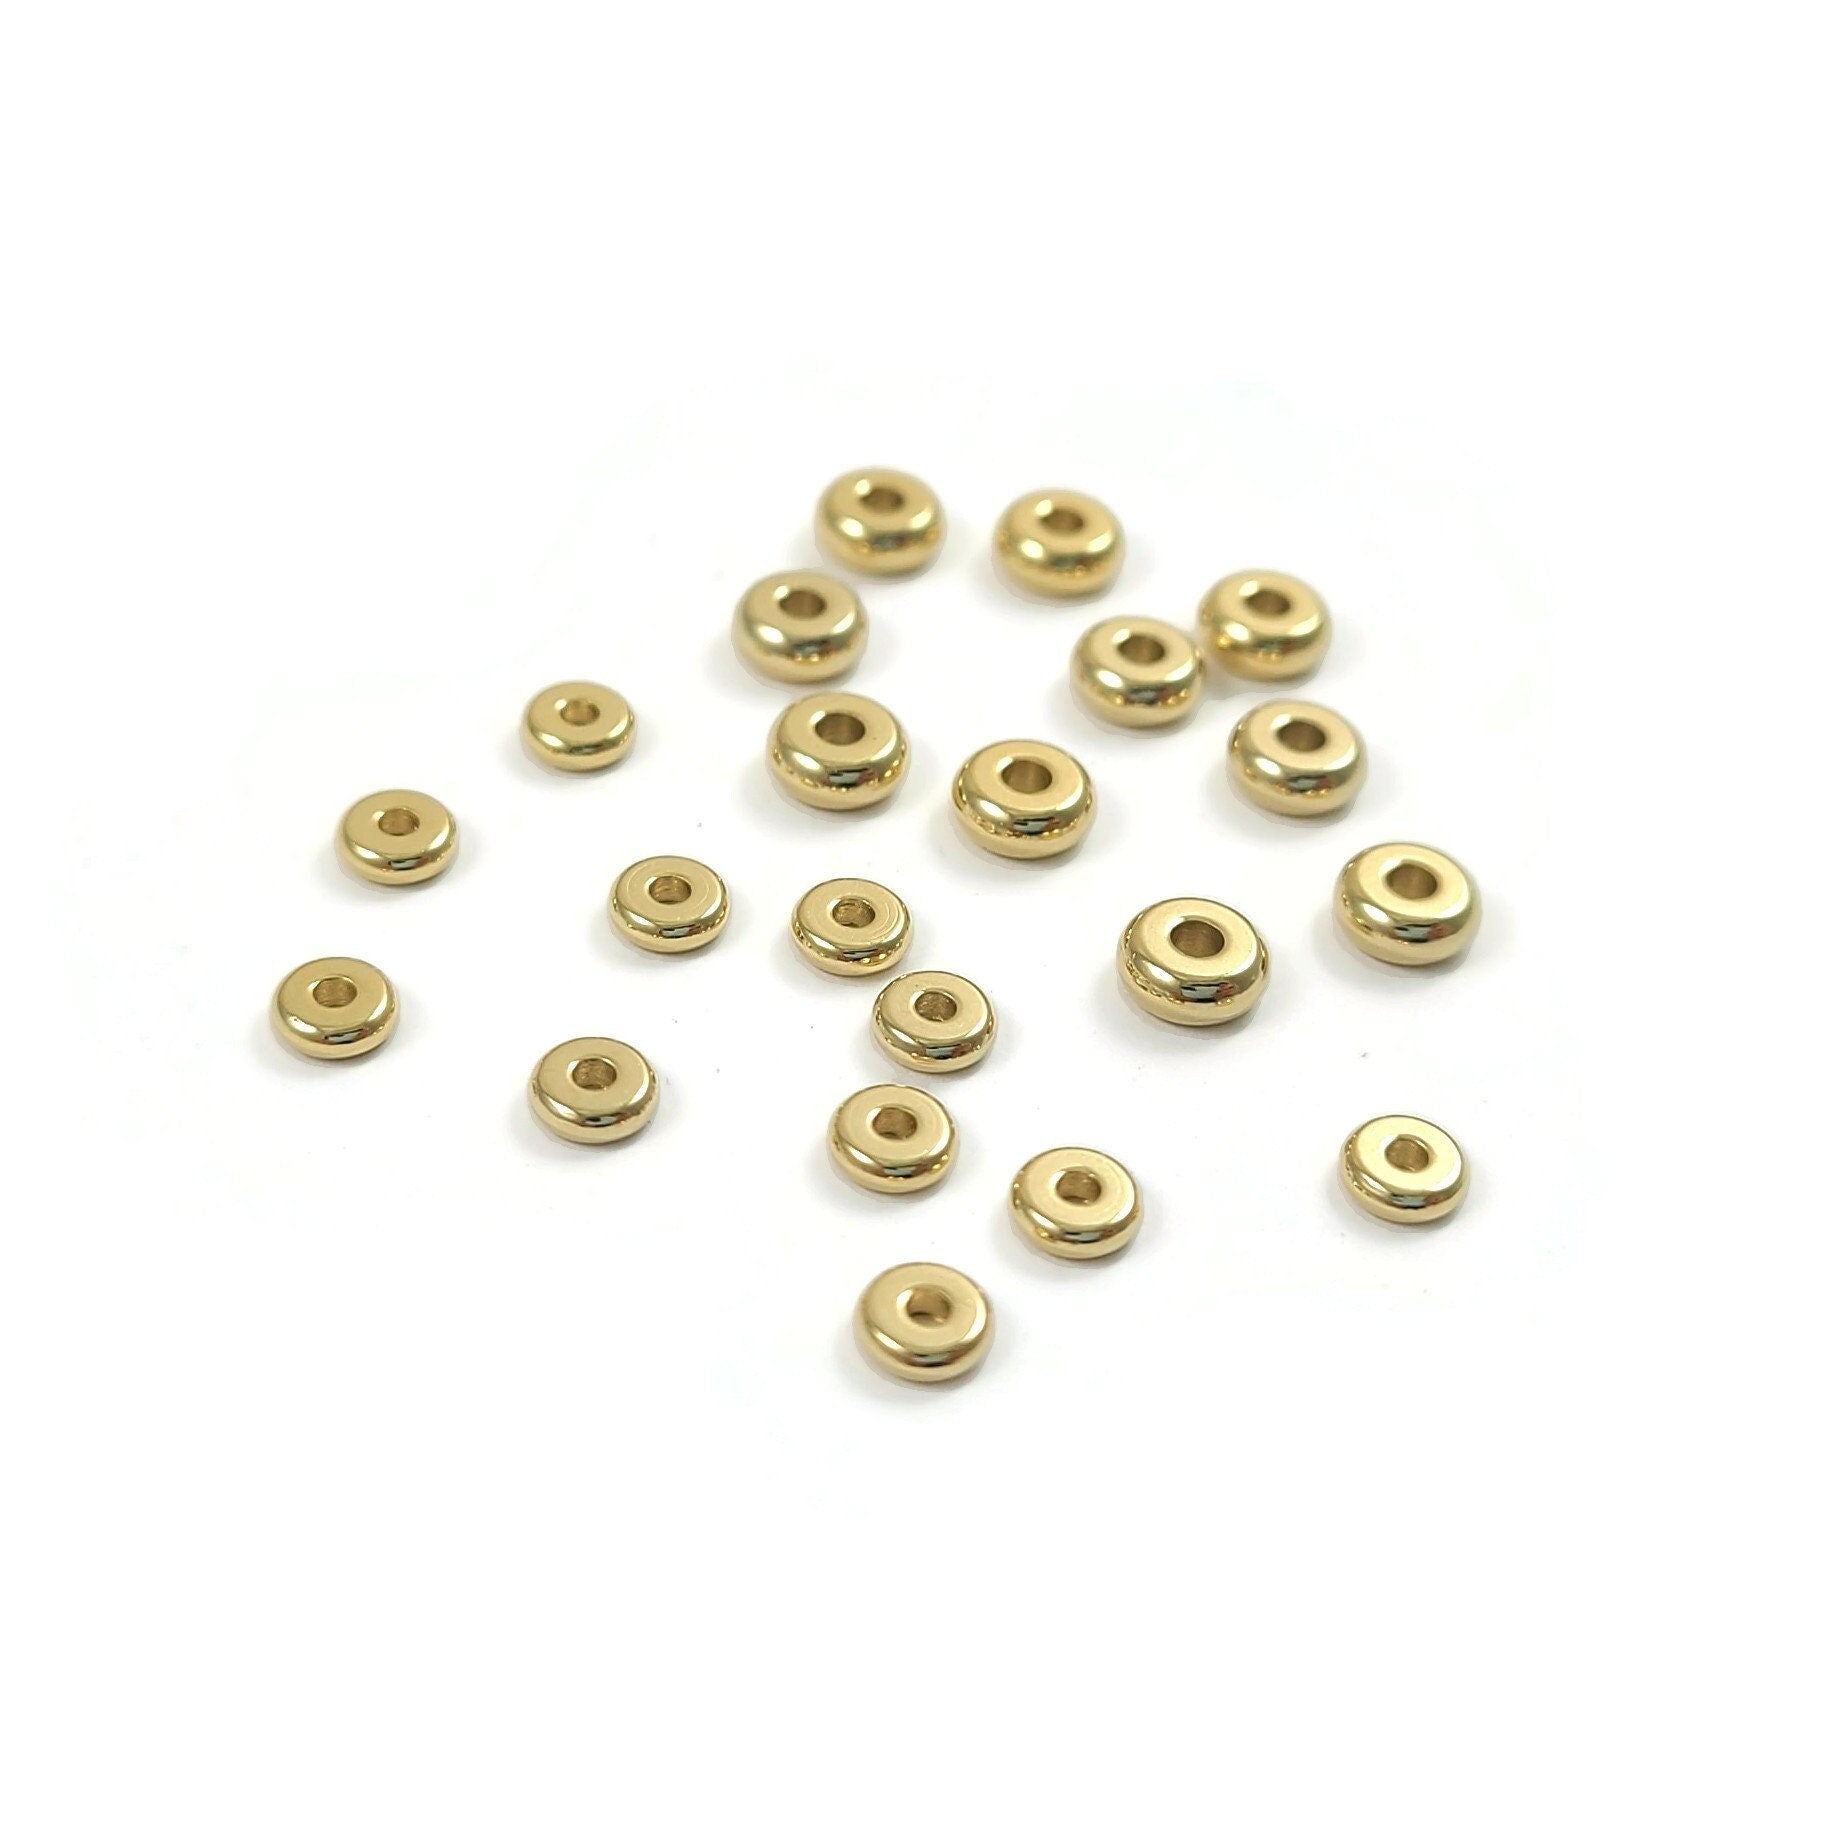 Sterling & Gold Beads/Spacers 3mm Gold Filled Beads - Qty 25